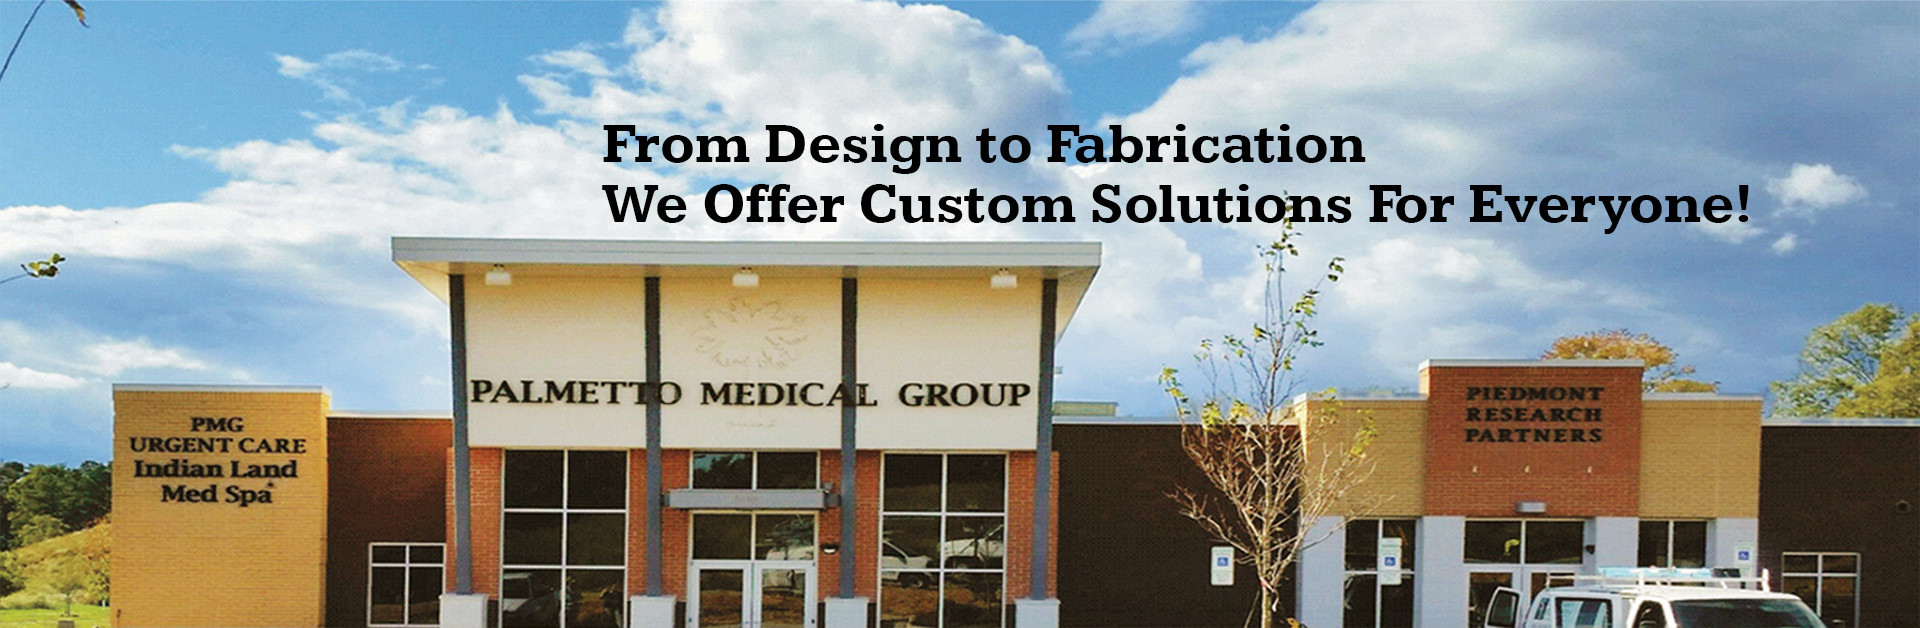 From Design to Fabrication We Offer Custom Solutions for Everyone